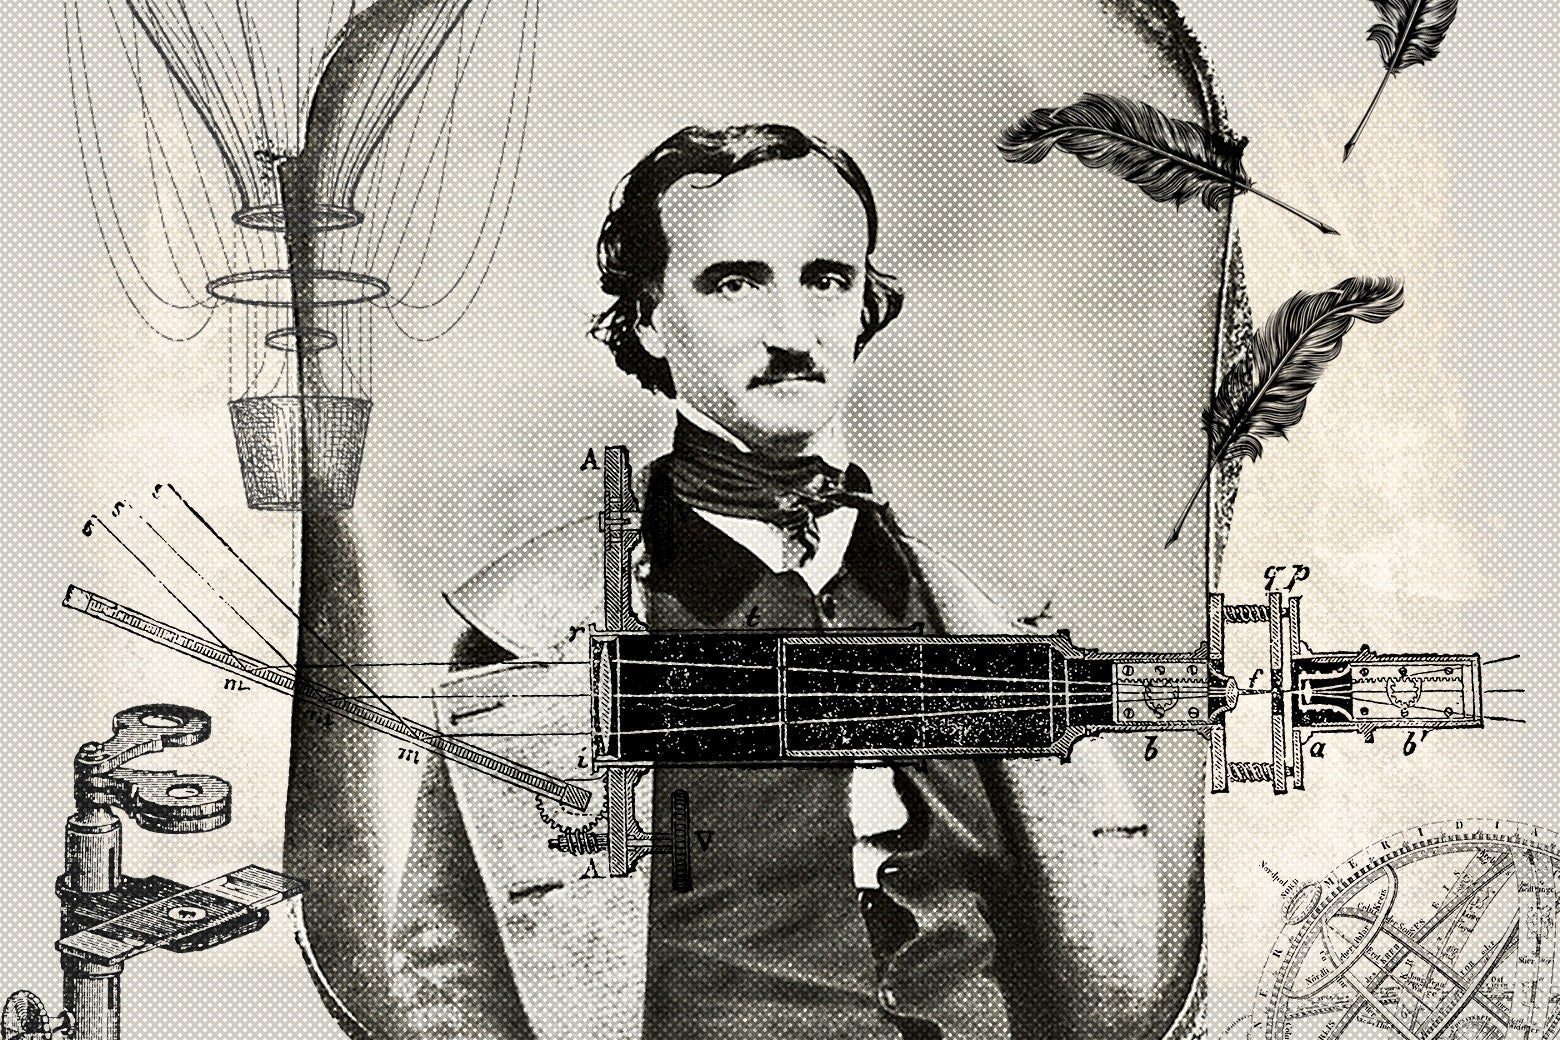 Collage of Edgar Allan Poe surrounded by drawings of old-timey inventions including a hot-air balloon